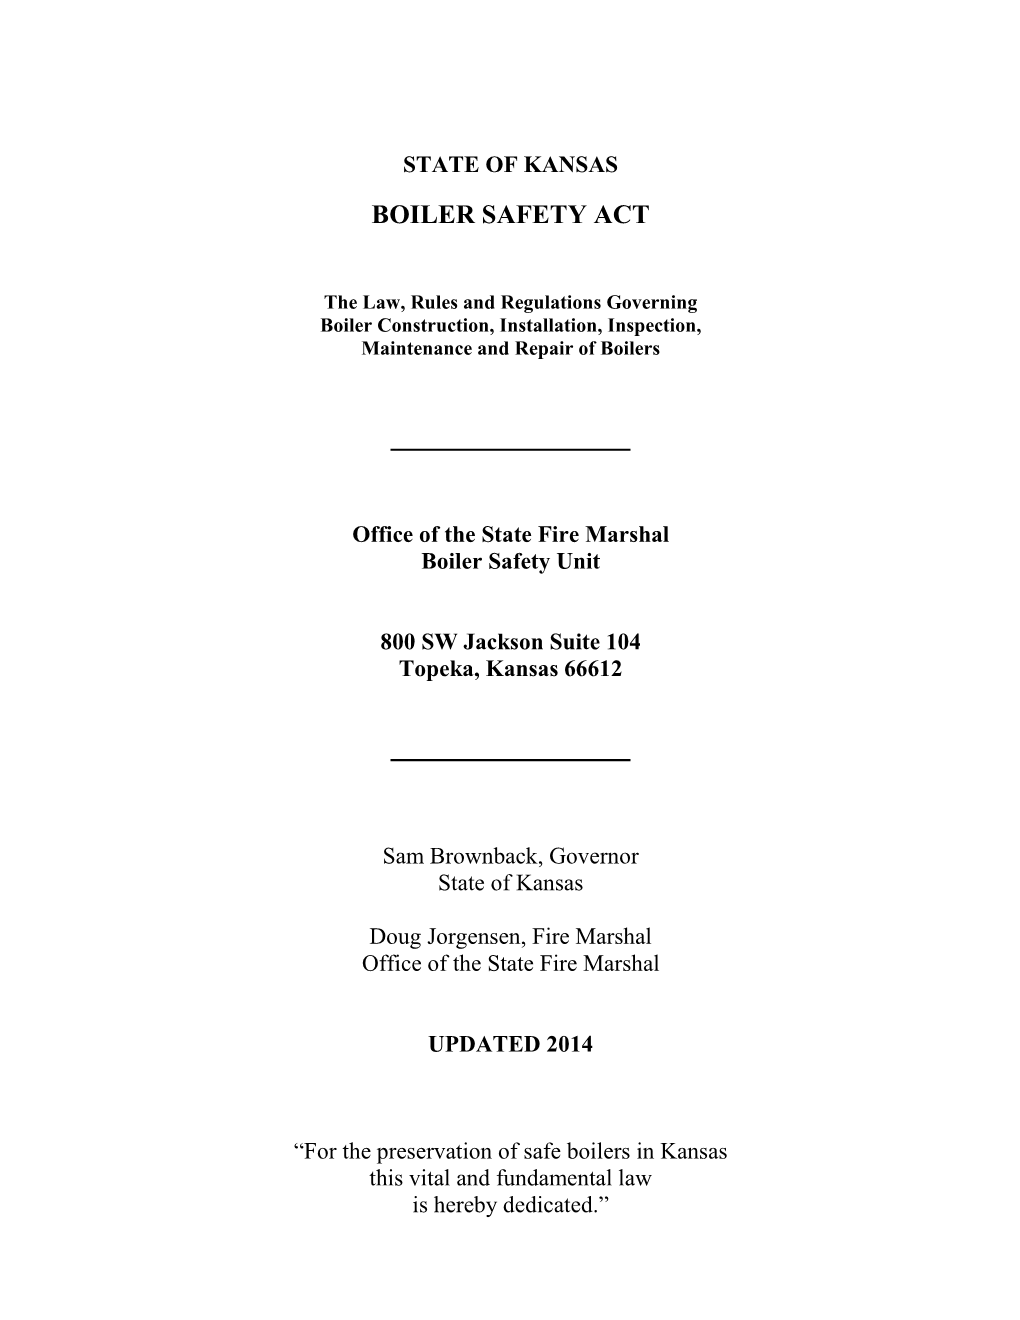 Boiler Safety Act